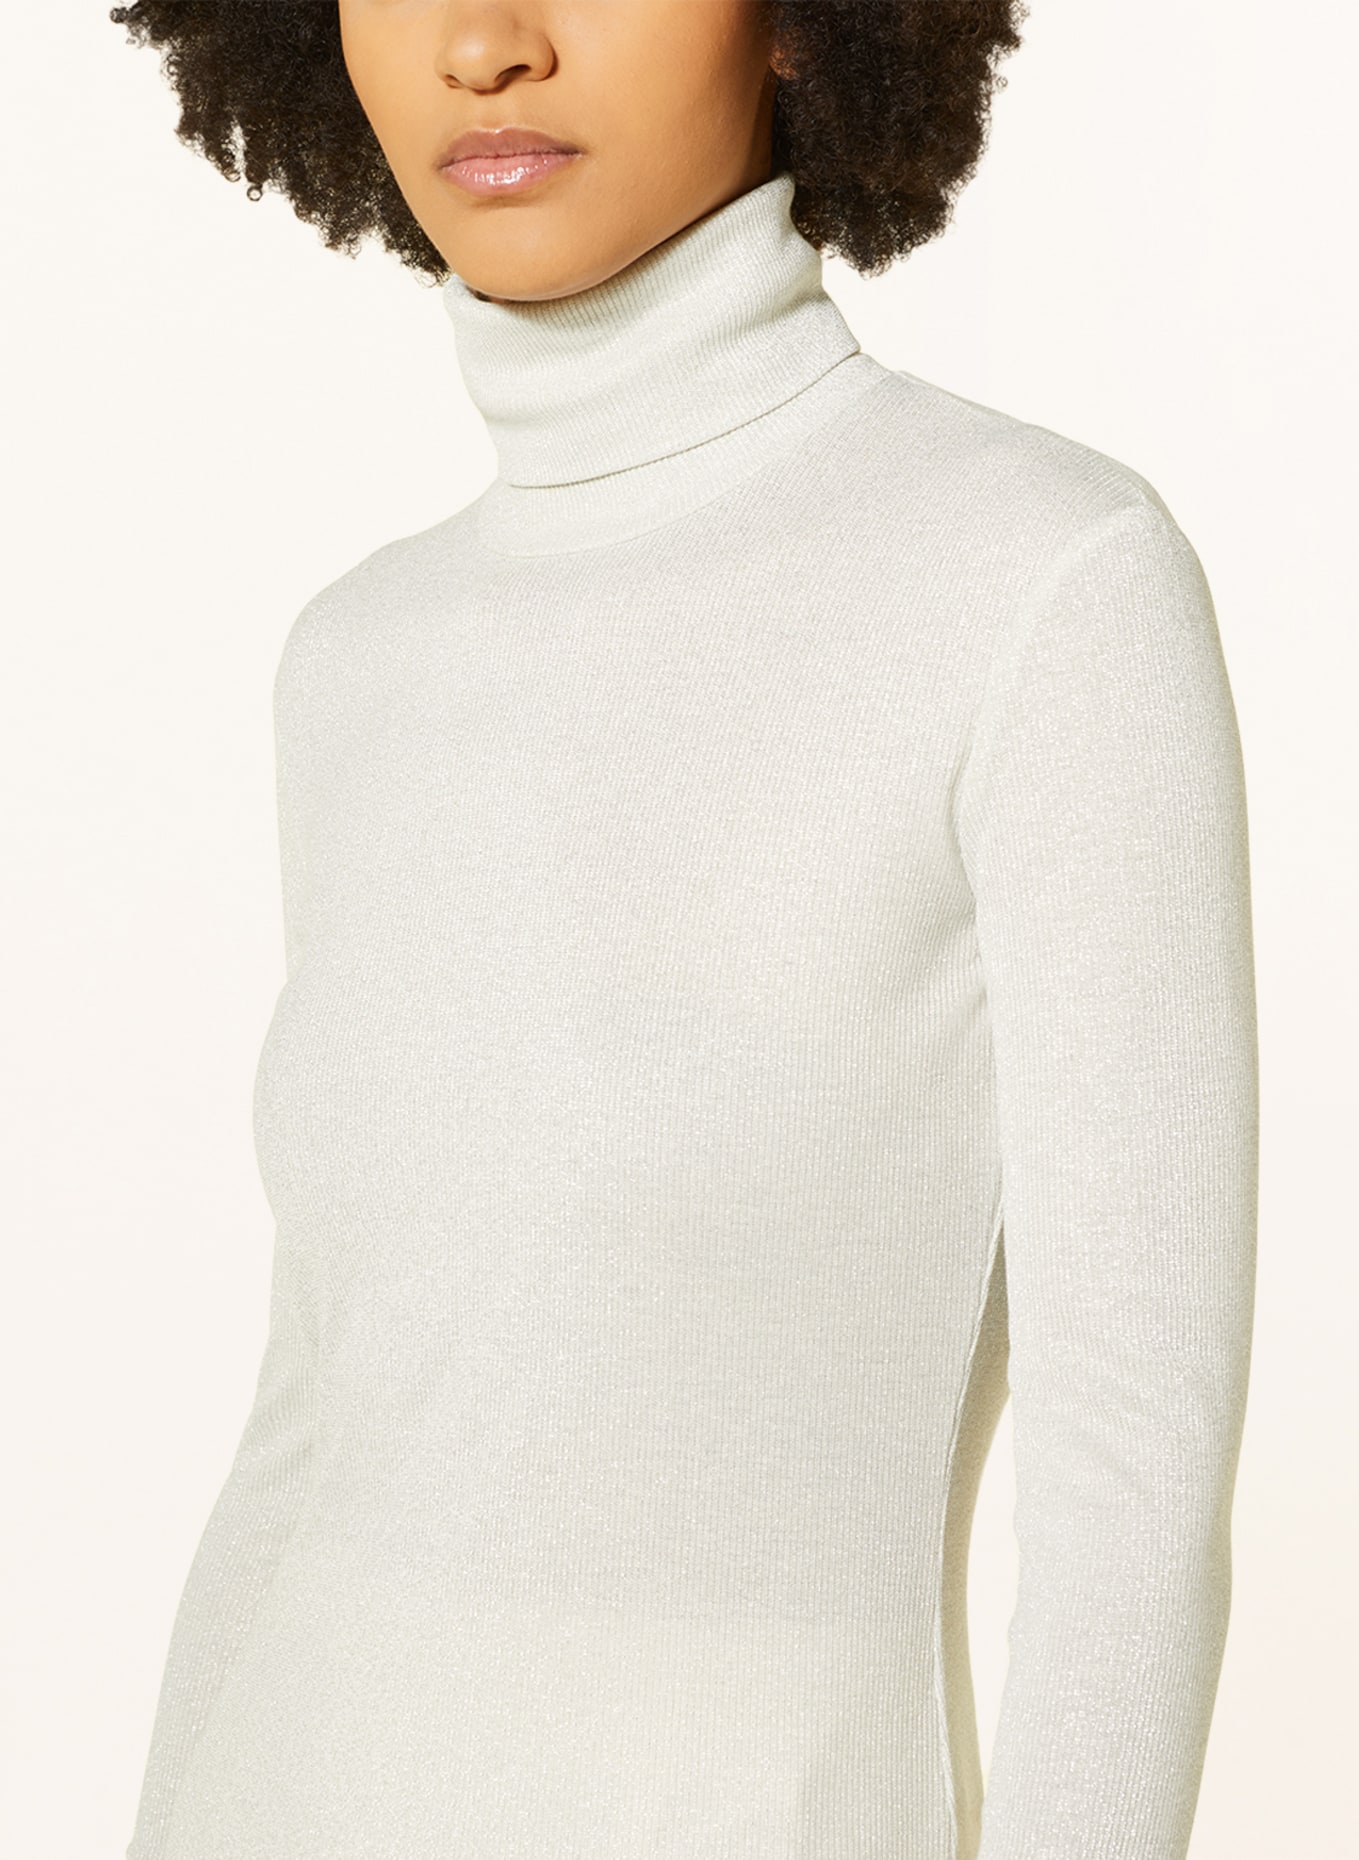 MAX & Co. Turtleneck shirt BAGNANTE with glitter thread, Color: LIGHT GRAY (Image 4)